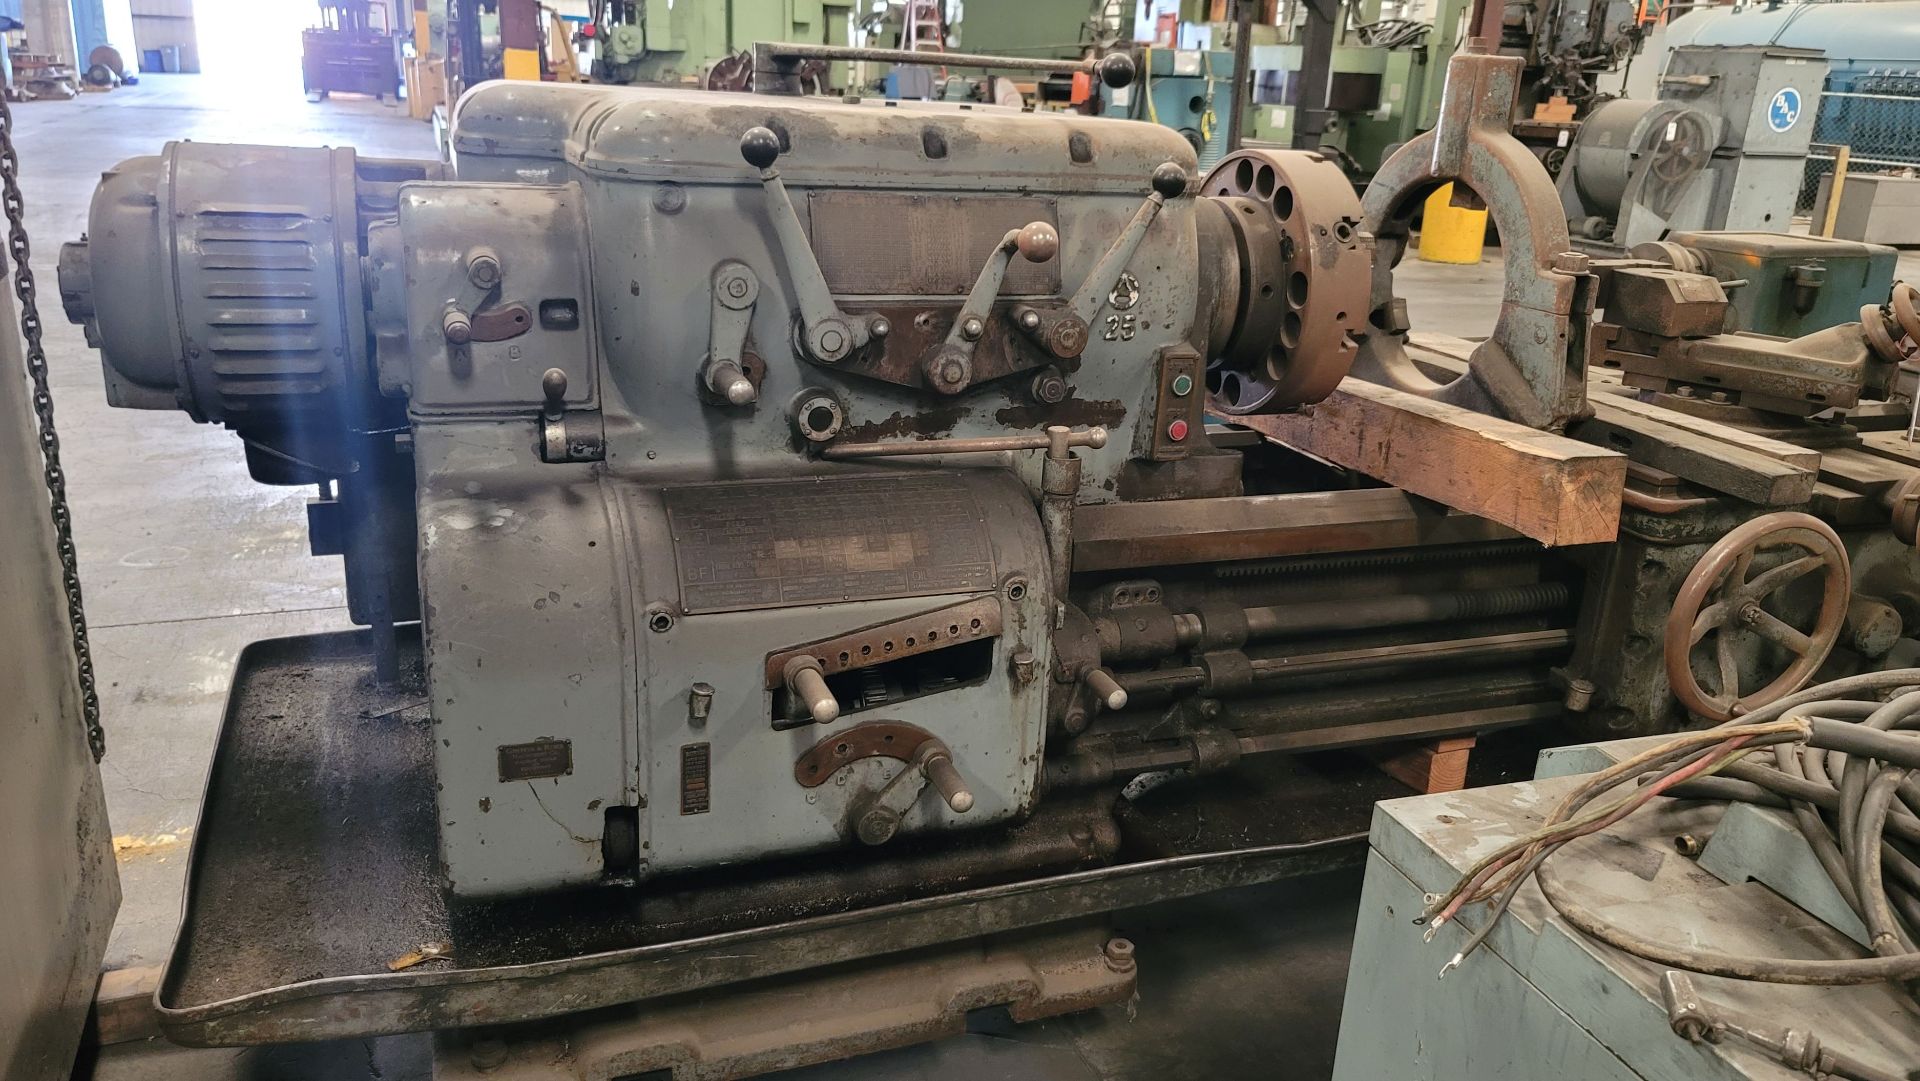 AXELSON A25 ENGINE LATHE, 18" CHUCK, 25" X 120" - Image 7 of 9